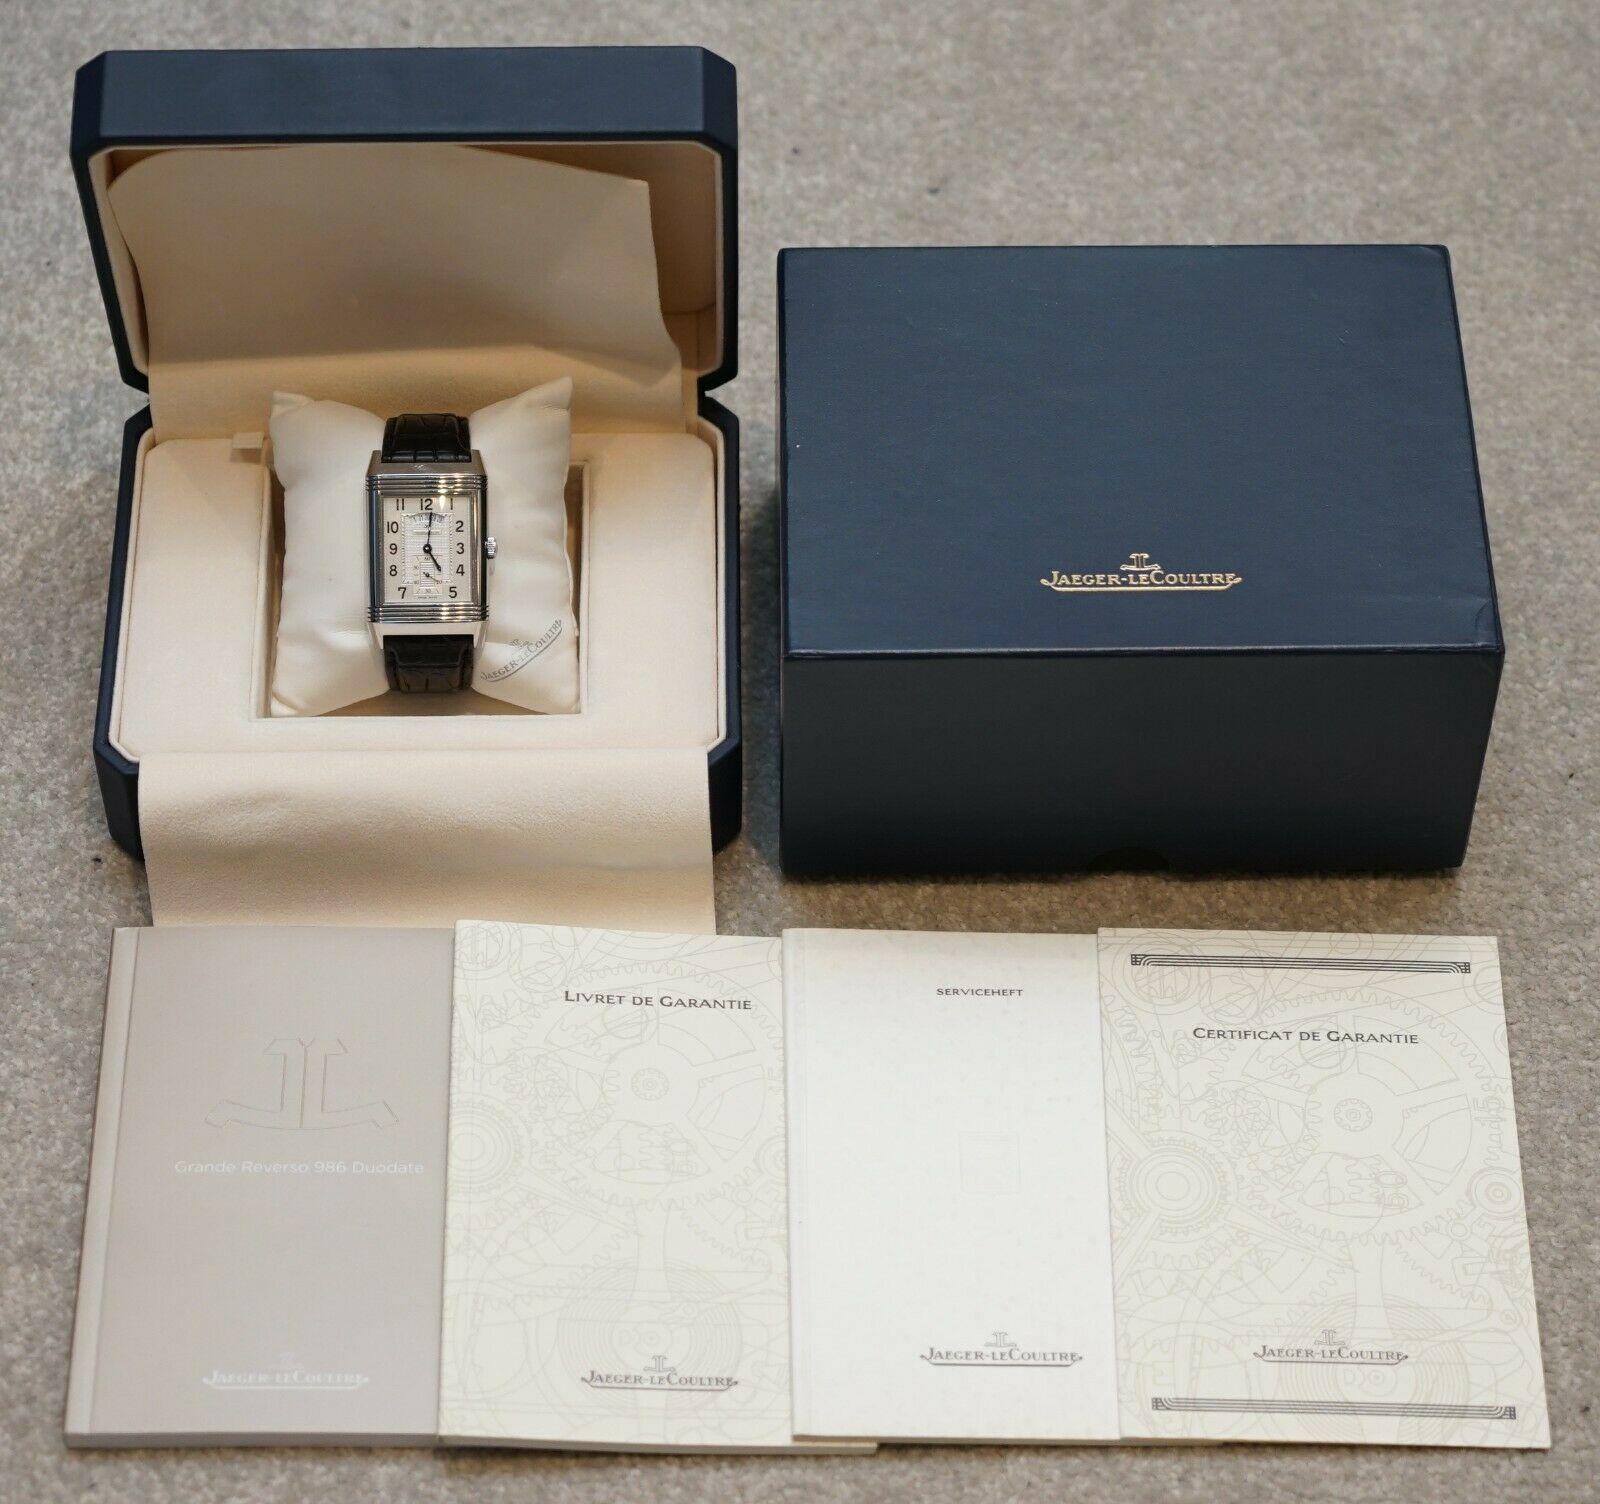 Wimbledon-Furniture

Wimbledon-Furniture is delighted to offer for sale this stunning and very rare Limited Edition 0723/1500 Jager LeCoulter Grande Reverso 986 Duodate double sided wrist watch.

Well, where to begin!  I had wanted a double sided